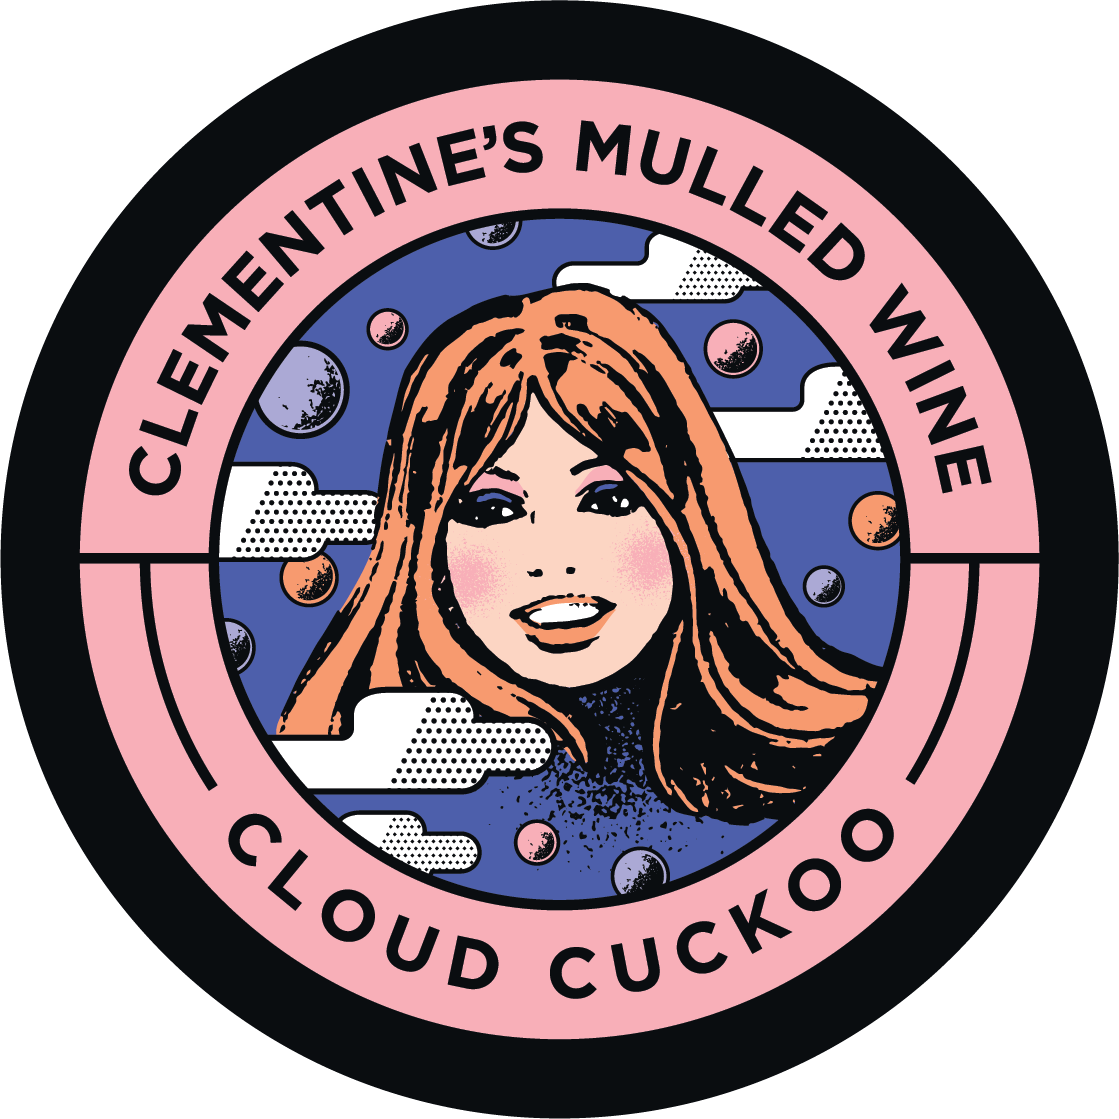 Cloud Cuckoo Clementine's Mulled Wine 20 Litres